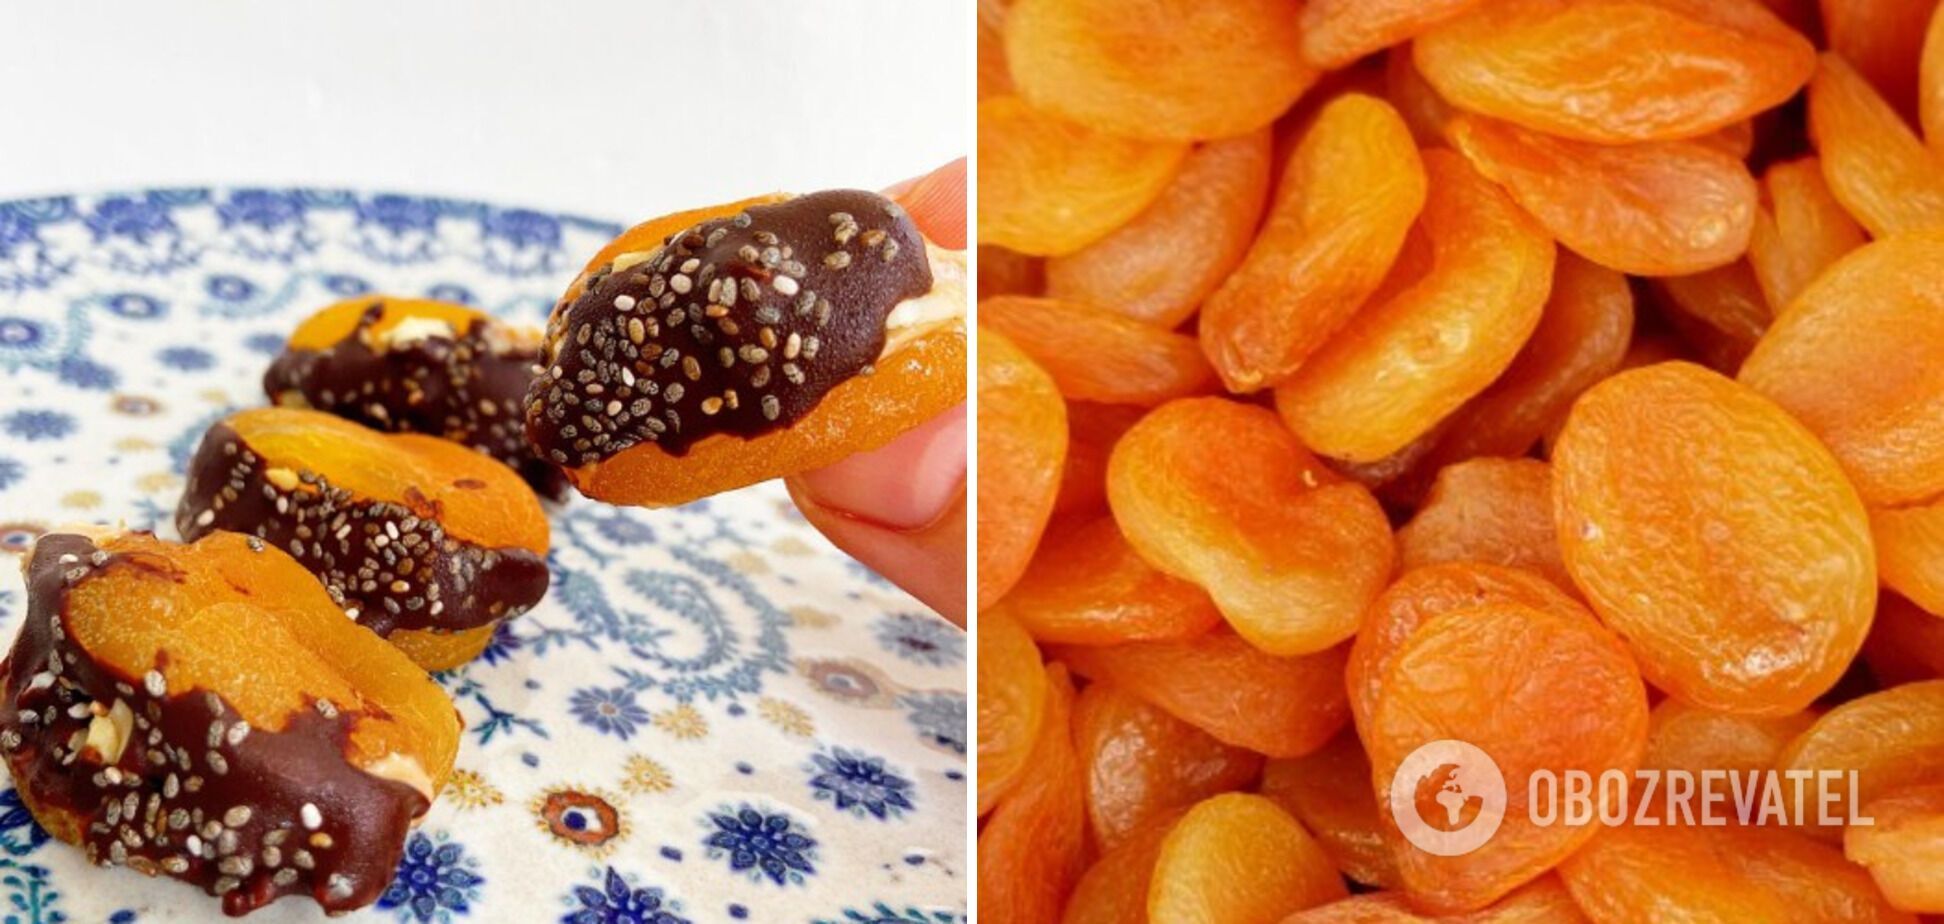 Homemade candies with dried apricots